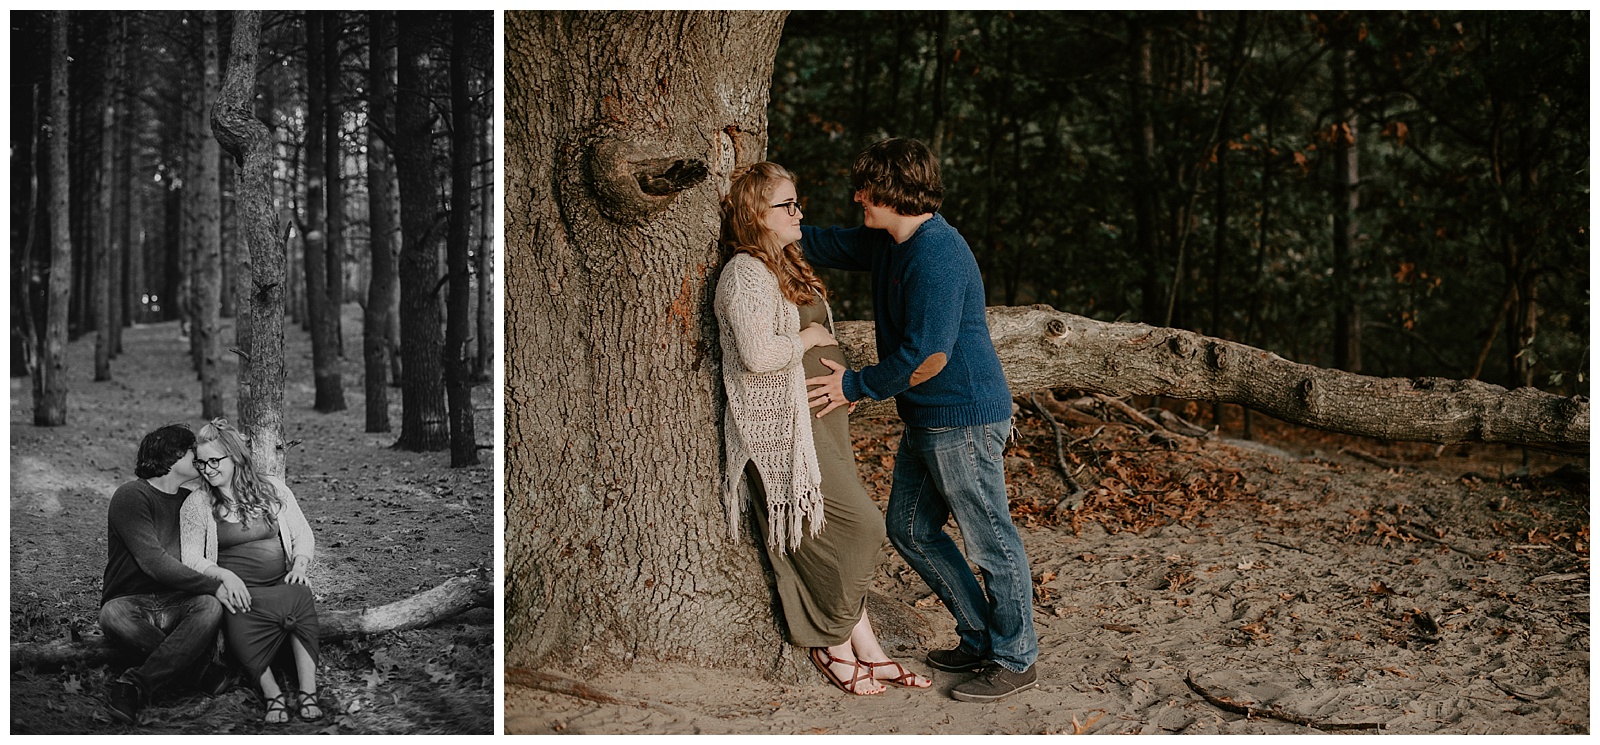 Maternity Session at Provin Trails